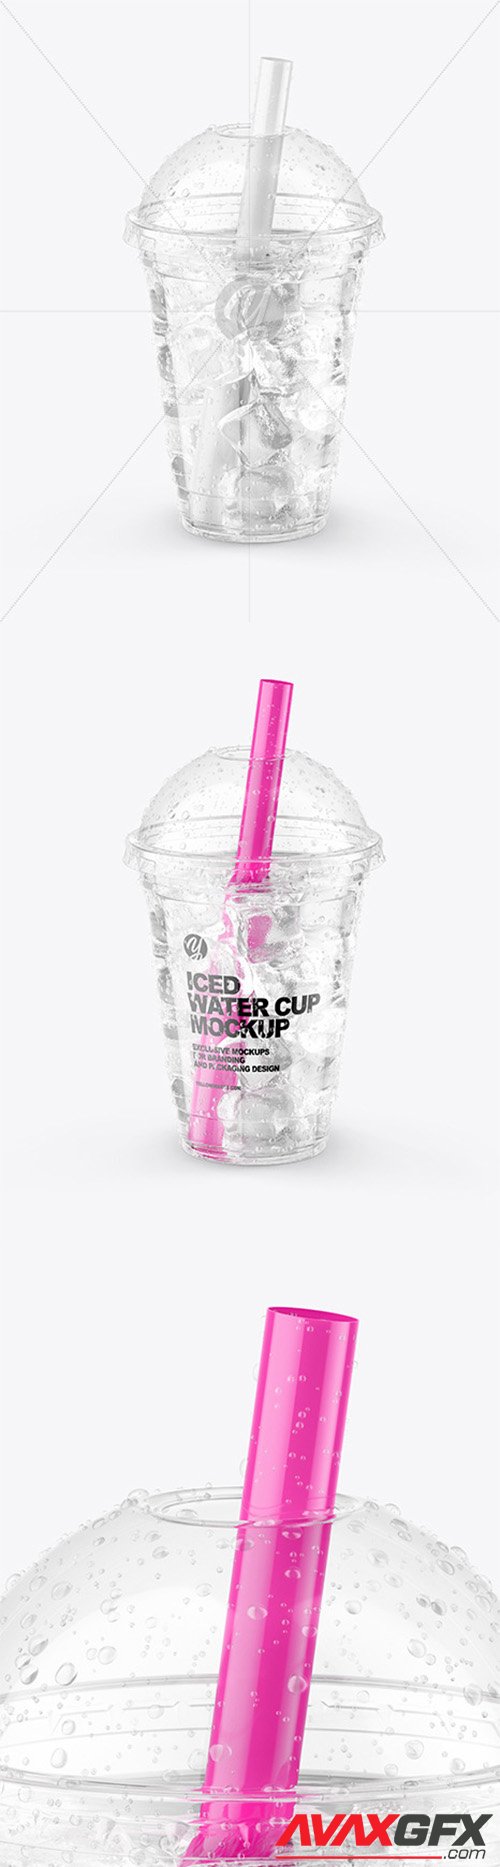 Iced Water Cup Mockup 64946